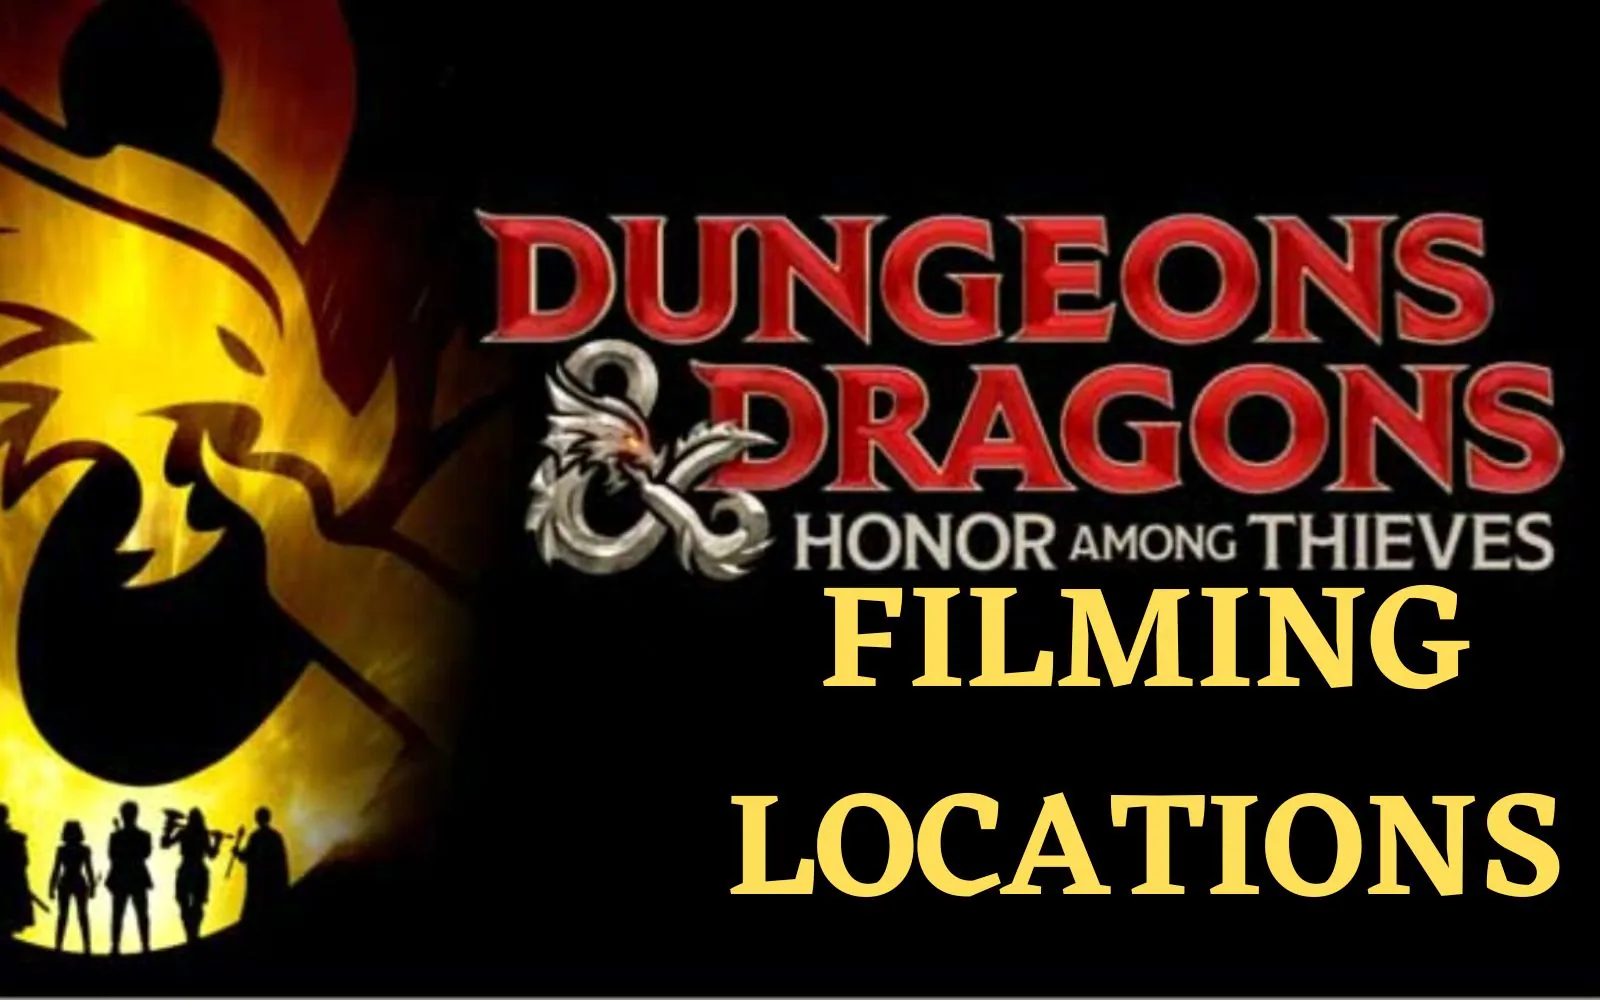 Dungeons & Dragons: Honor Among Thieves Filming Locations